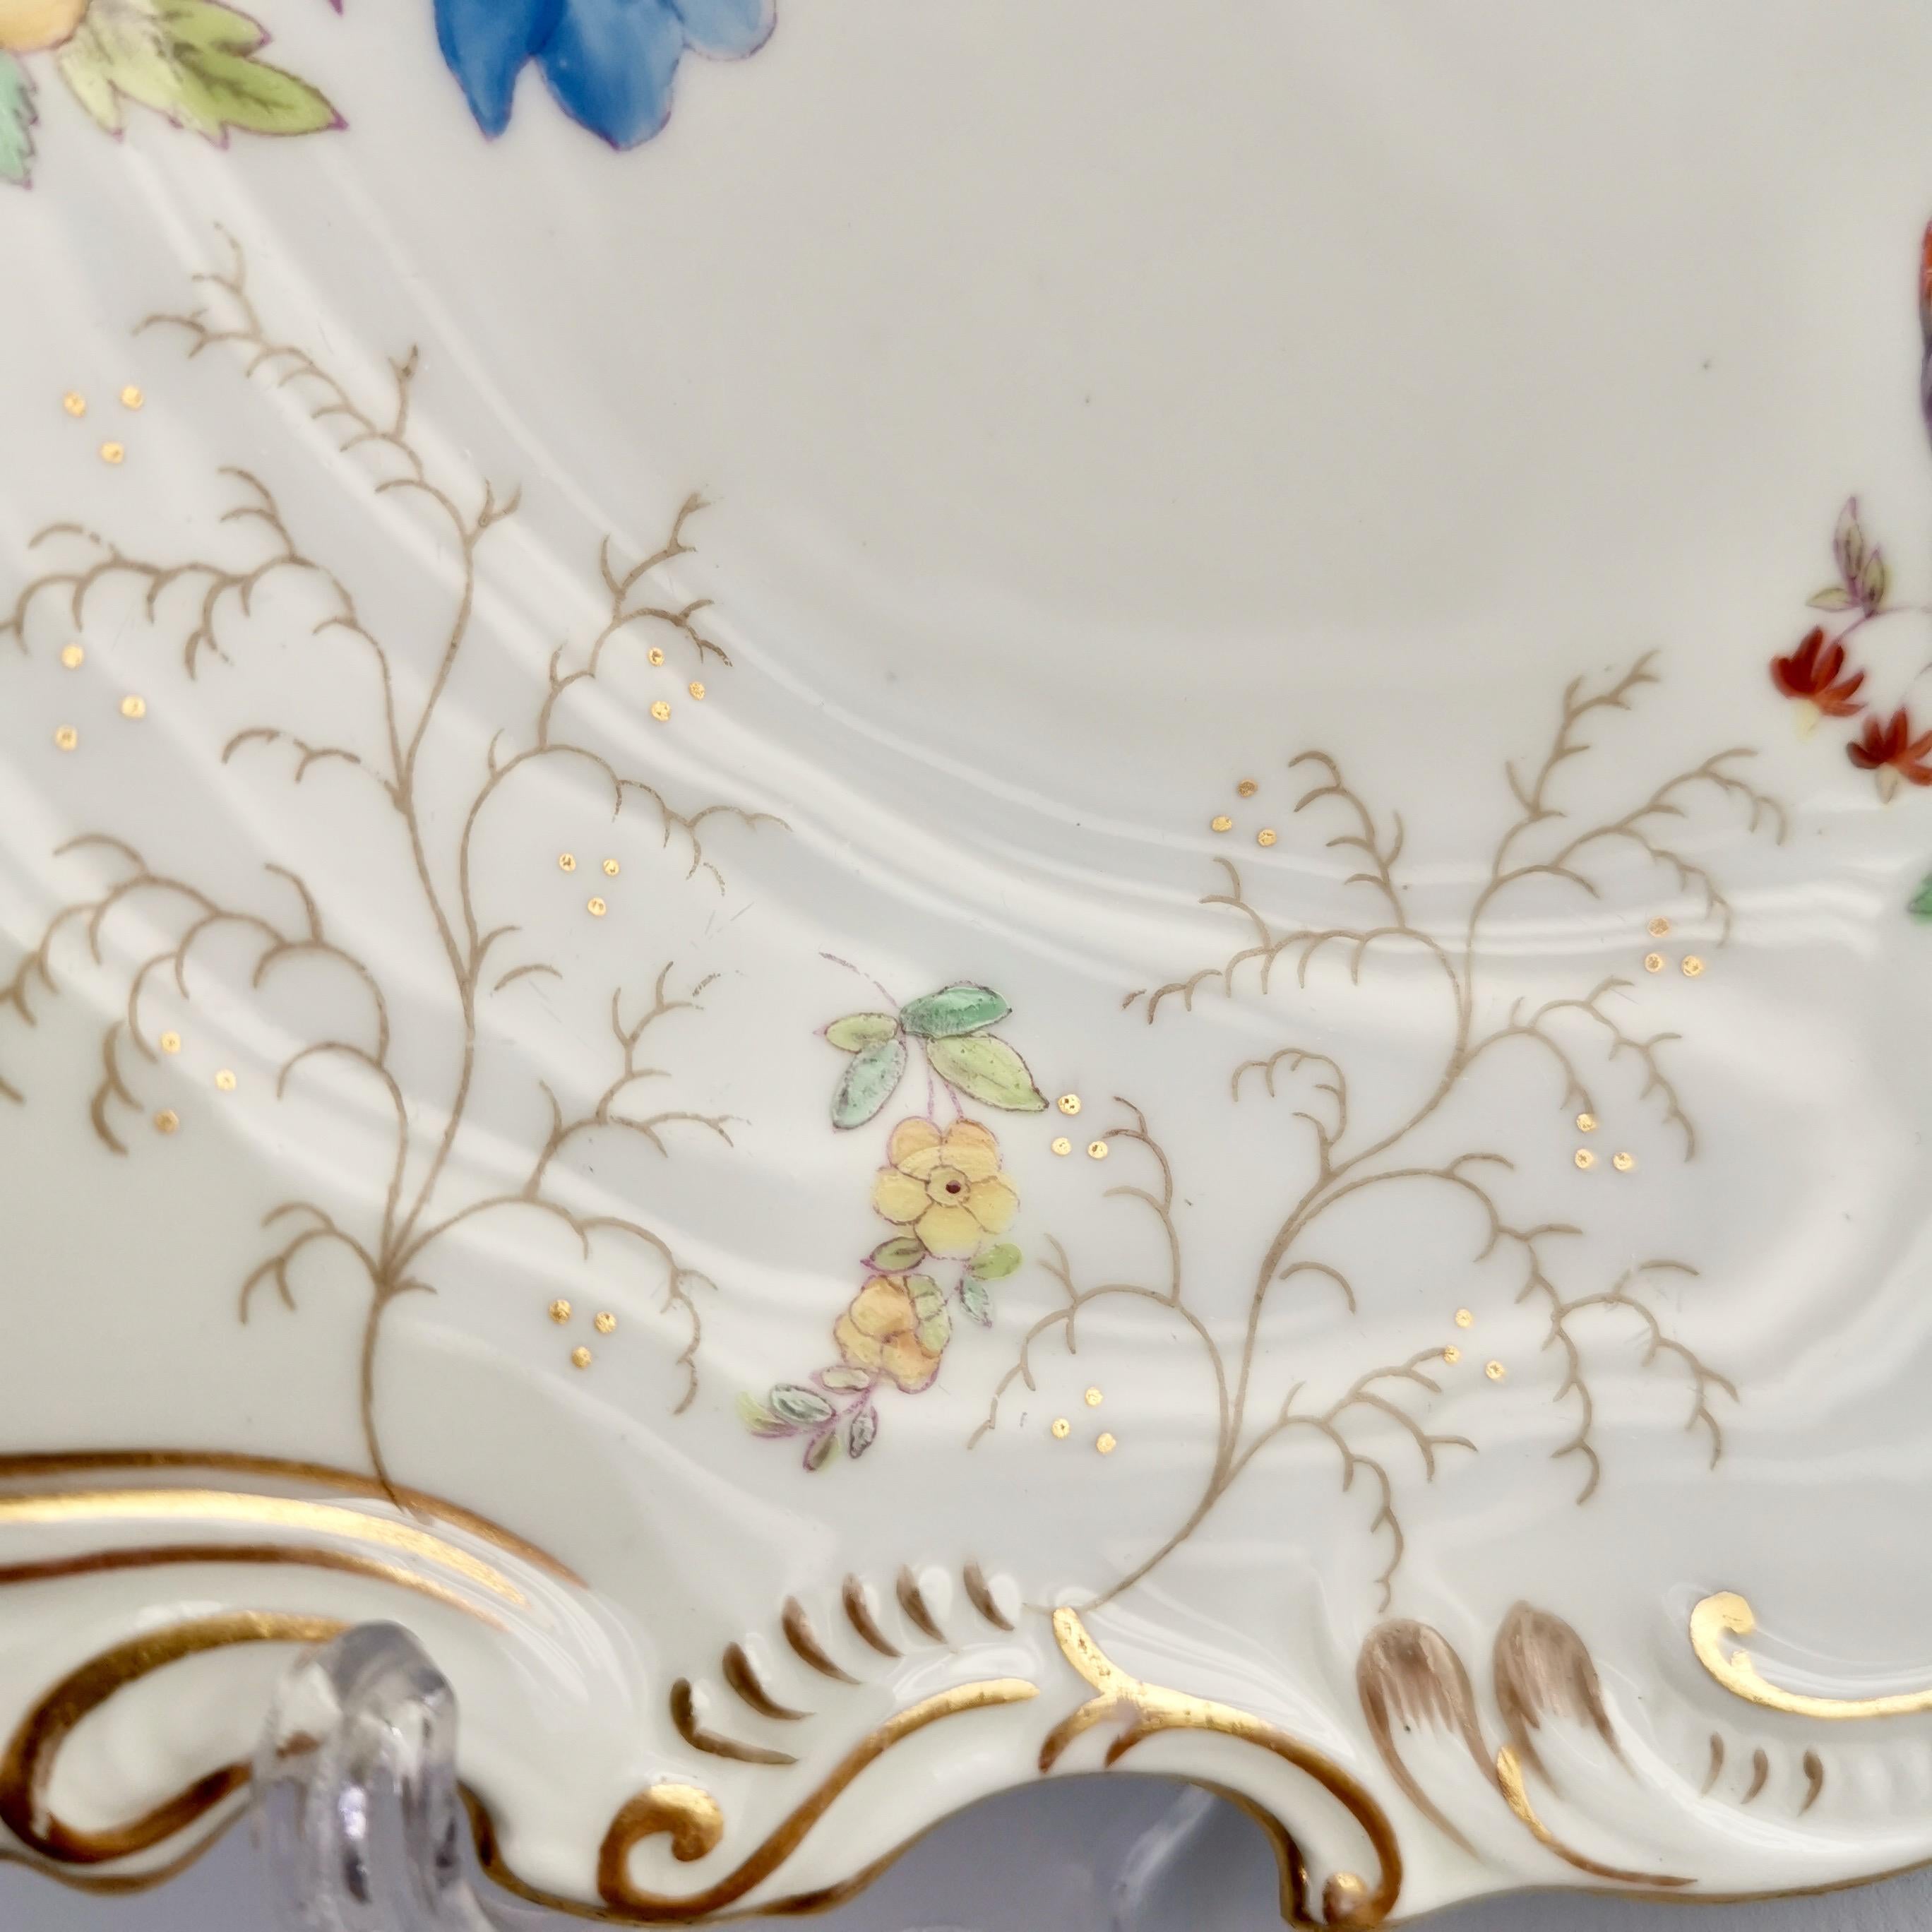 Coalport Porcelain Serving Dish, White with Flowers, Victorian, 1891-1926 For Sale 2